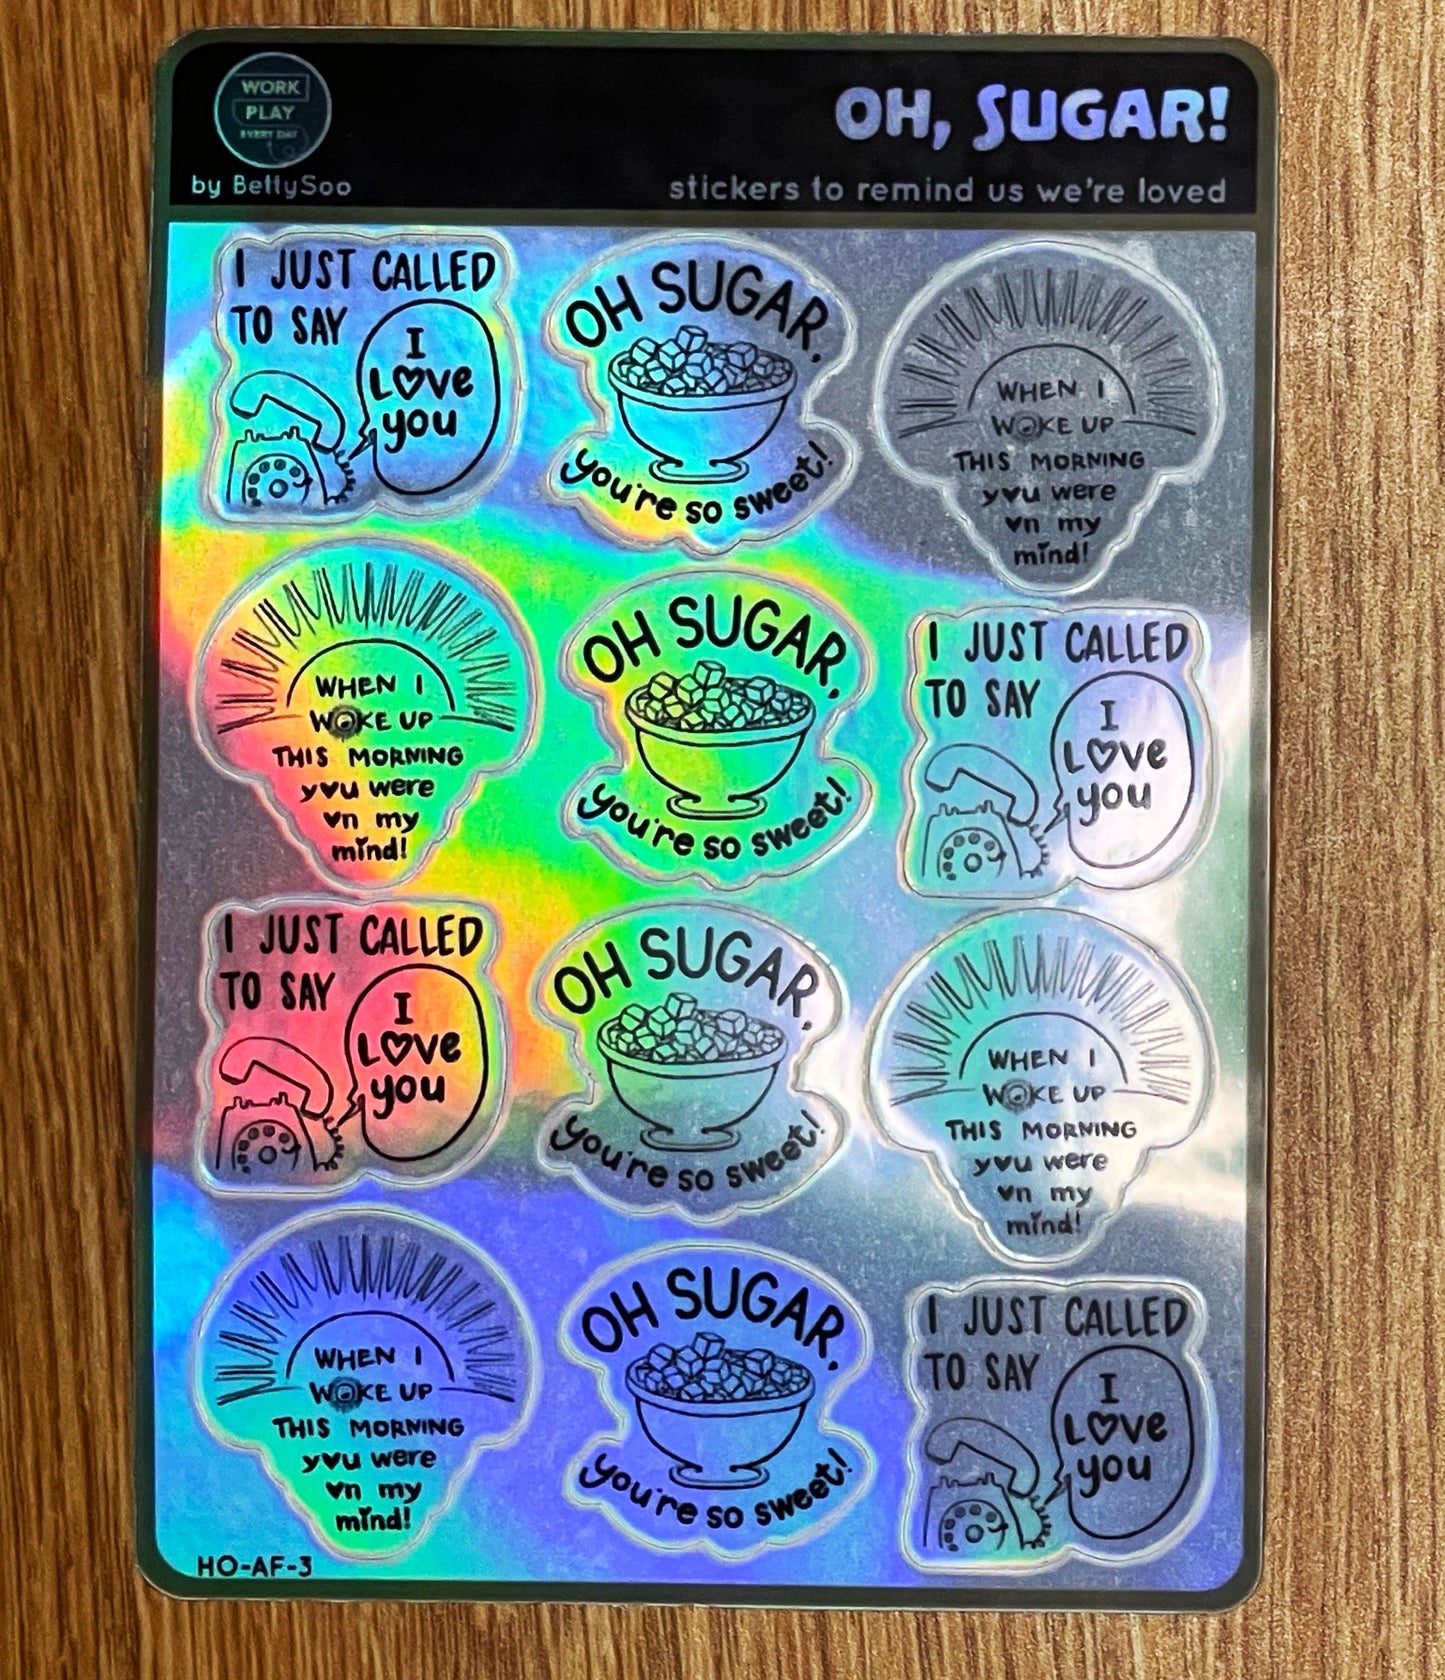 Oh Sugar! (Translucent, Clear Gloss, or Holographic)